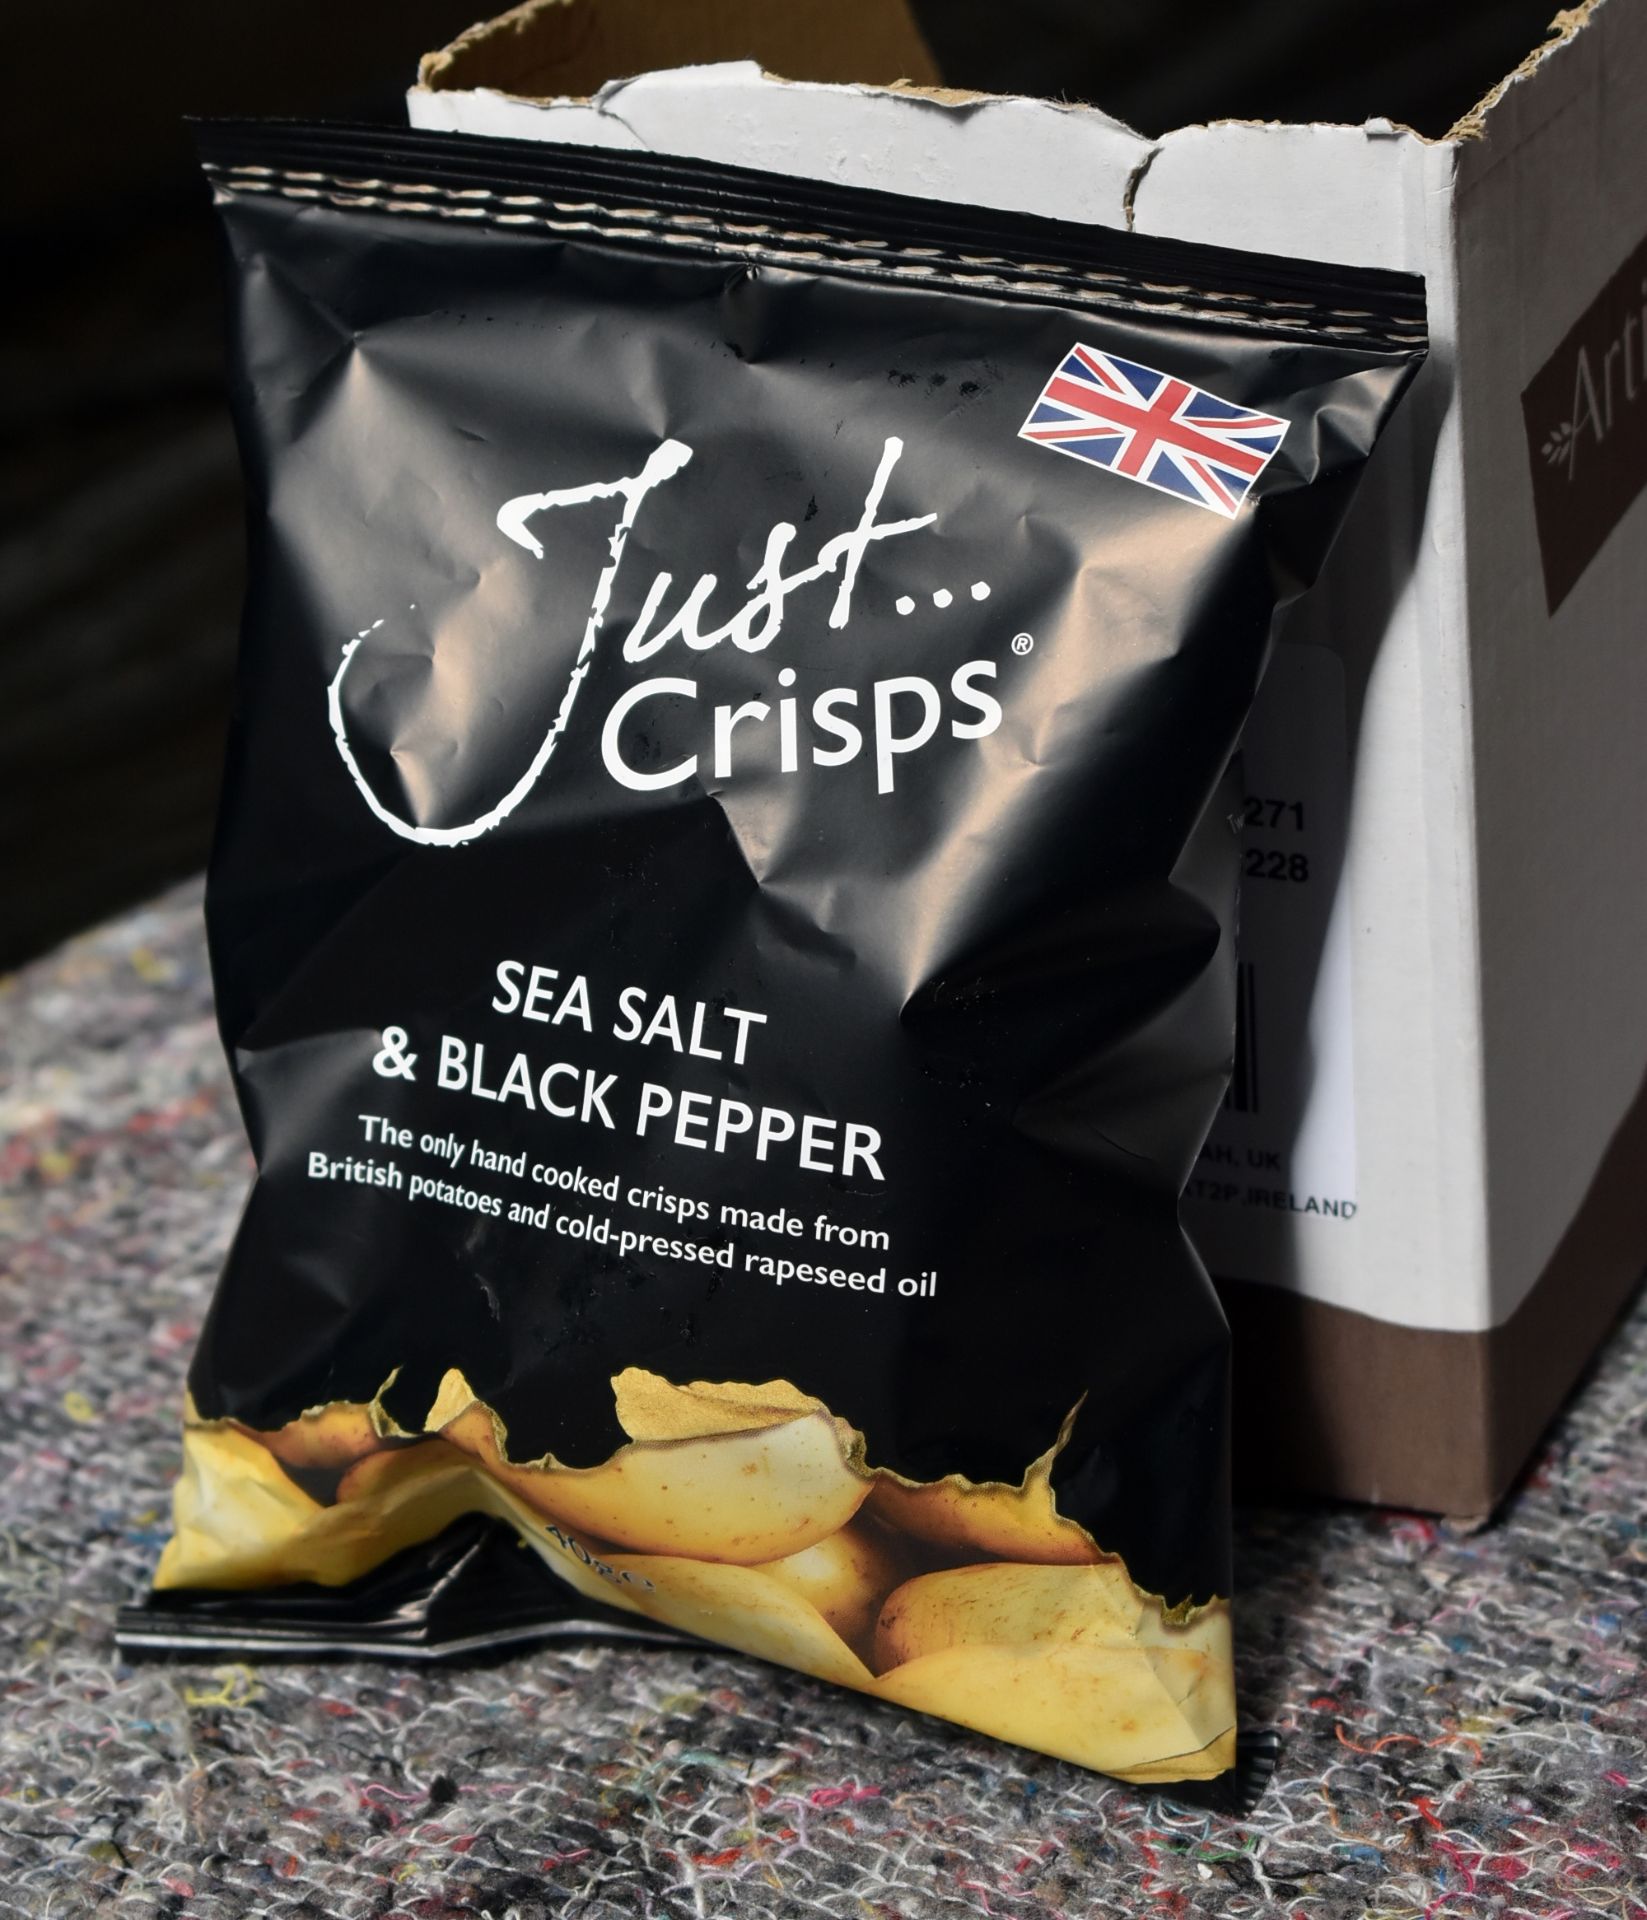 36 x Assorted Consumable Food Products Including Bags of JUST Flavoured Crisps- Ref: TCH405 - - Image 13 of 23